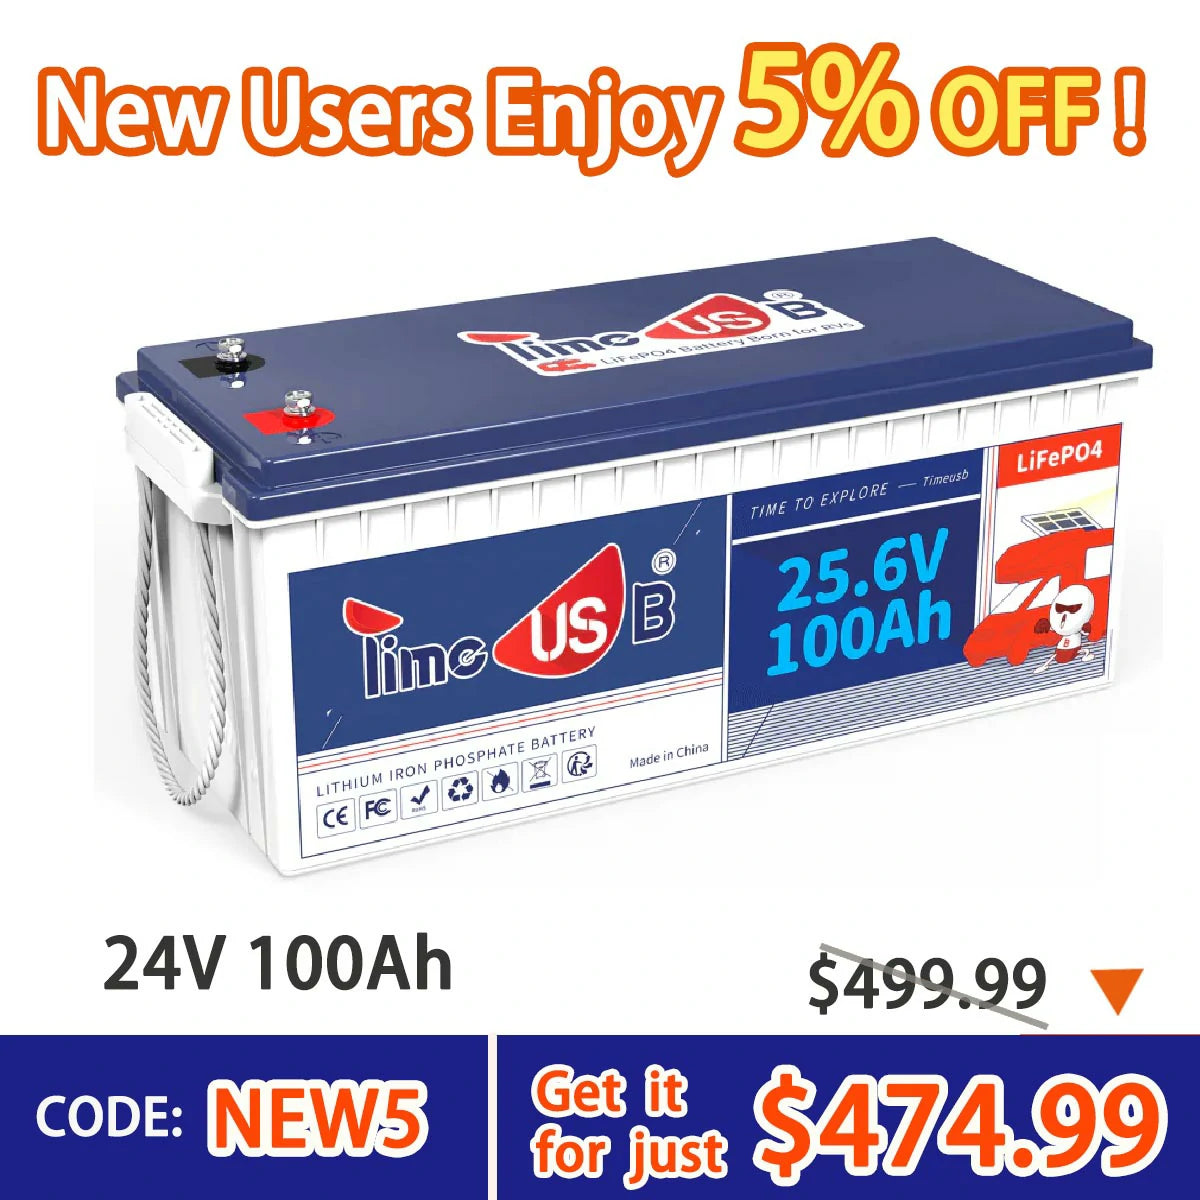 Timeusb 24V 100Ah LiFePO4 Battery, 2560Wh & 100A BMS